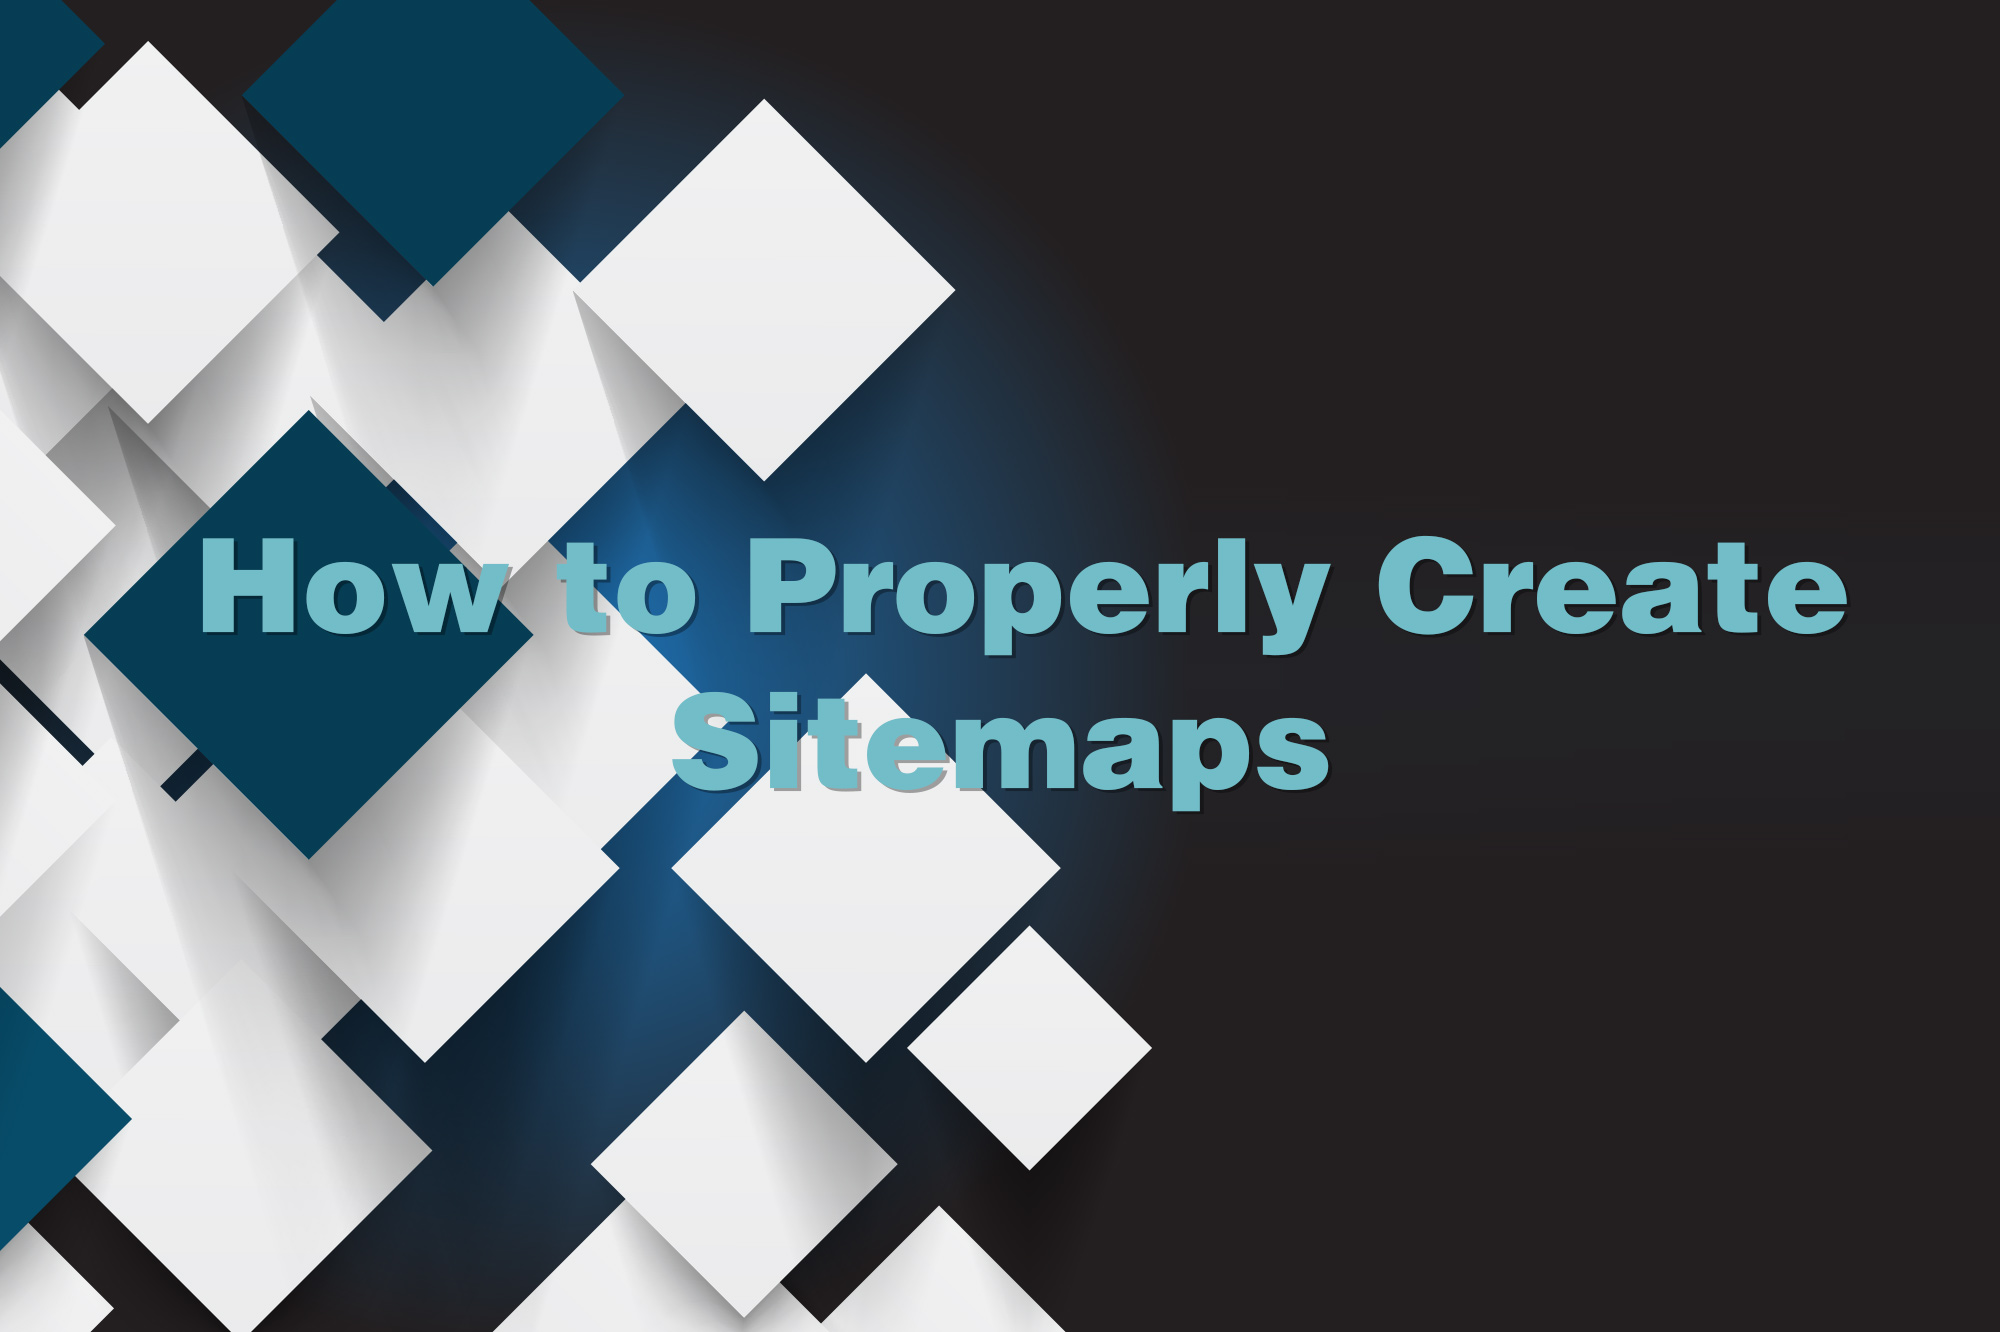 How to Properly Create Sitemaps